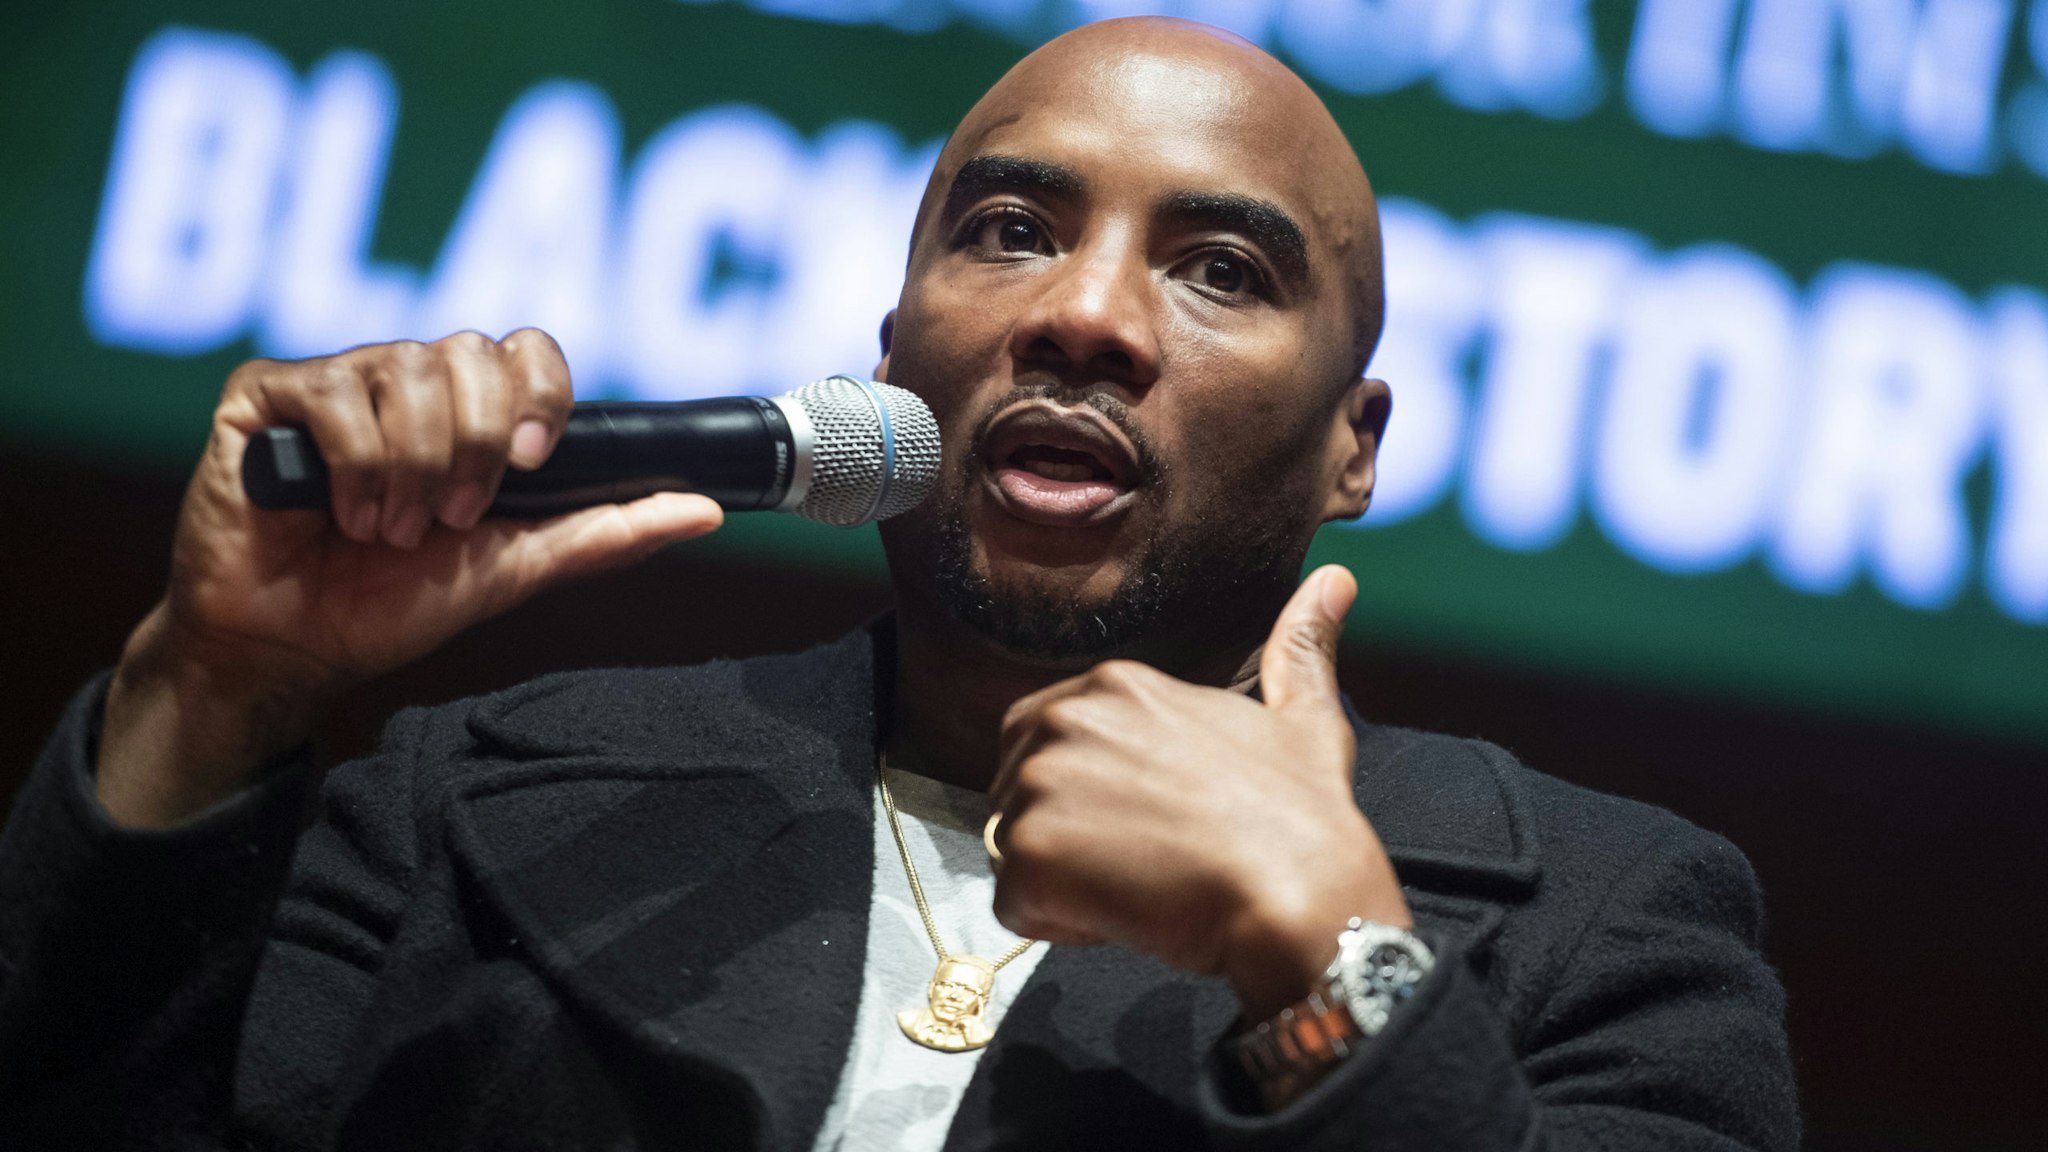 UNITED STATES - FEBRUARY 10: Charlamagne tha God, co-host of the Breakfast Club, conducts a discussion on the diversity of thought in the black community, in the Capitol Visitor Center during Black History Month on Monday, February 10, 2020.